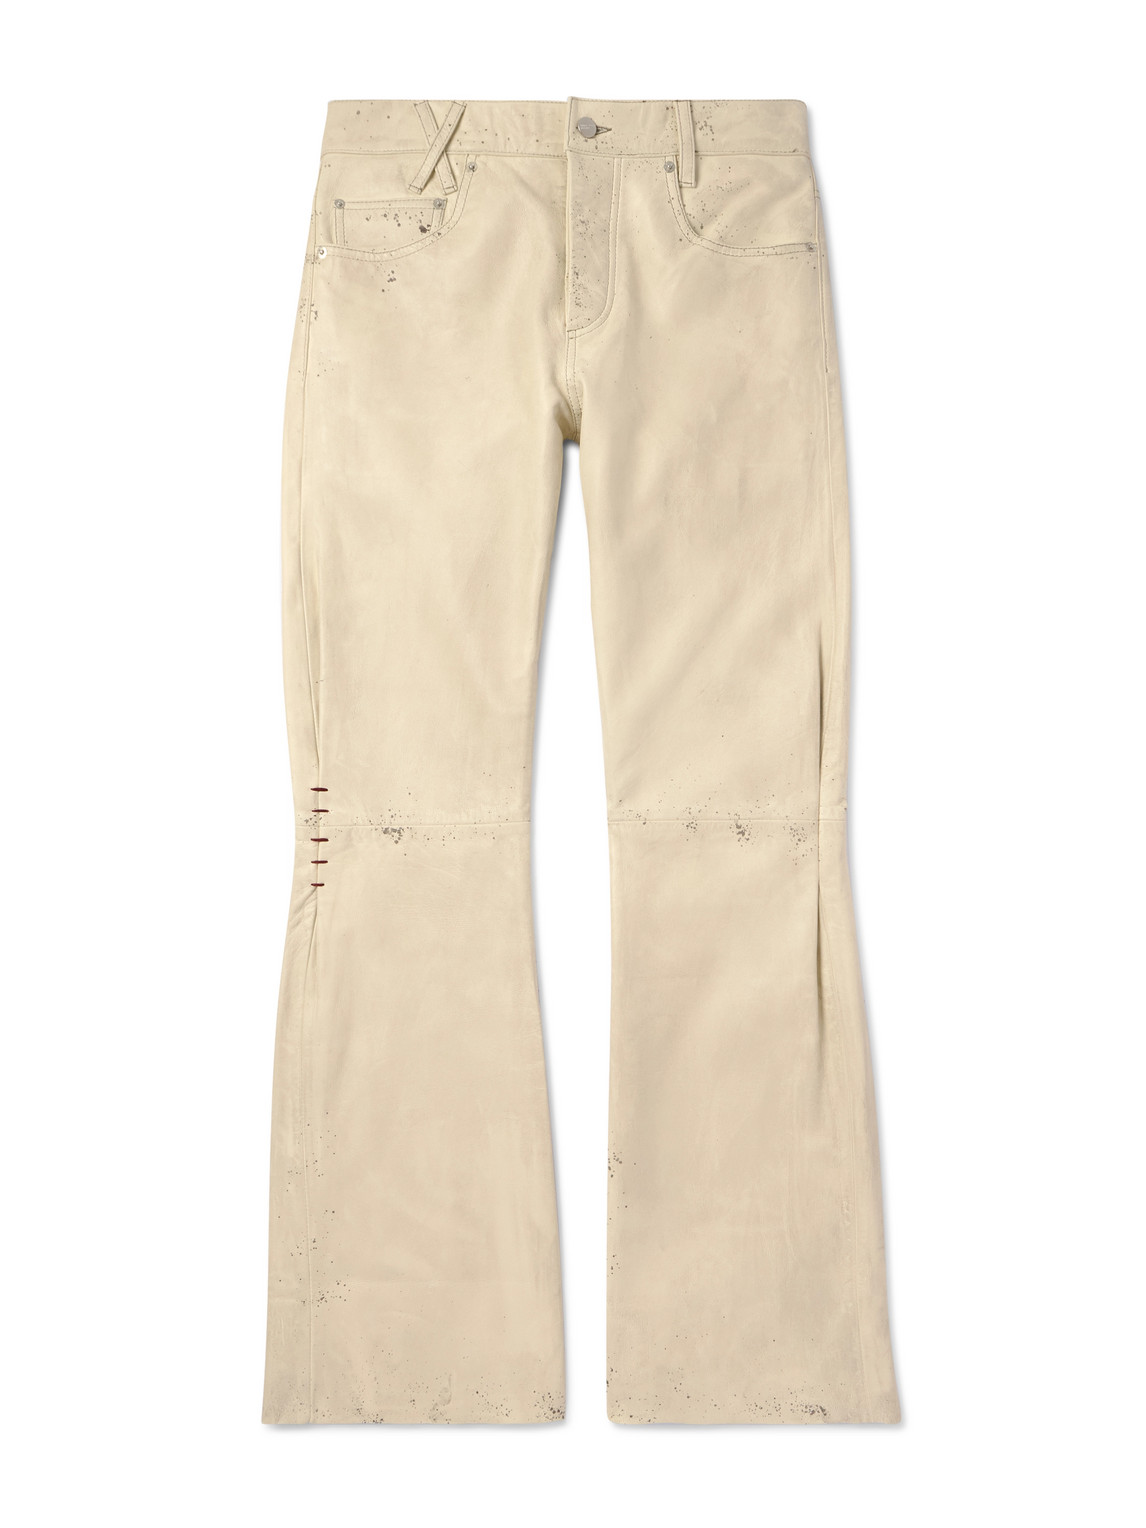 Enfants Riches Deprimes Flared Distressed Leather Trousers In Neutrals